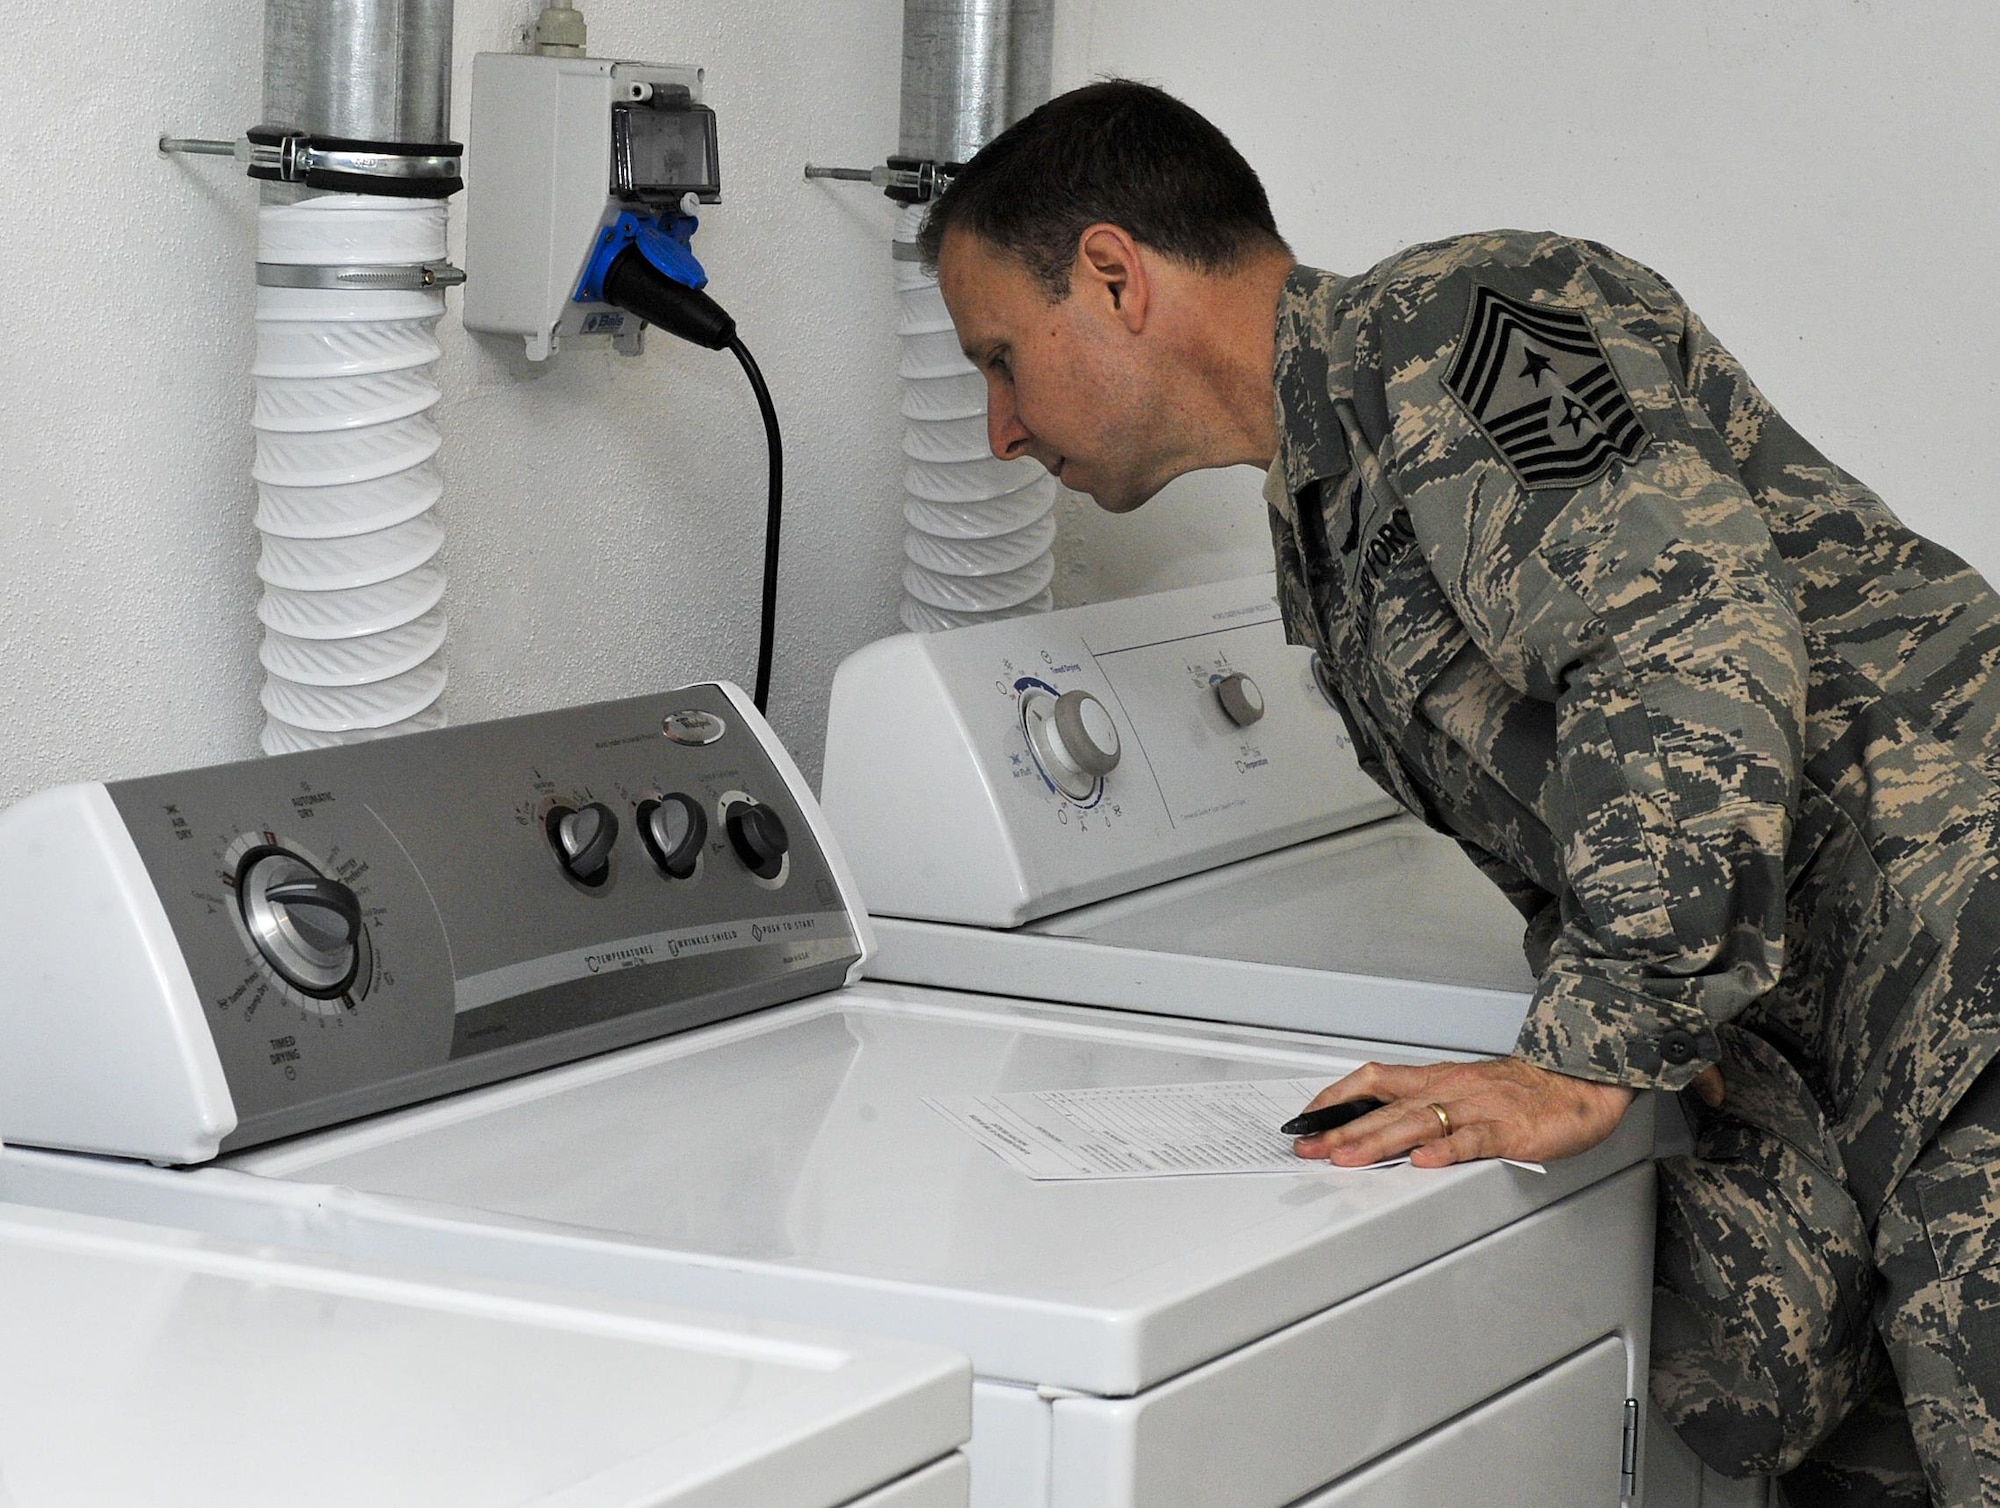 Chief Master Sgt. Mark Redden, 521st Air Mobility Operations Wing command chief, inspects a laundry room May 17, 2016, at Ramstein Air Base, Germany. For Ramstein’s first dorm of the quarter award, the first place dorm building received a $1,000 budget and the second place winners earned $500 to go toward whatever the residents agree upon to maintain or better their living quarters. (U.S. Air Force photo/Senior Airman Larissa Greatwood)